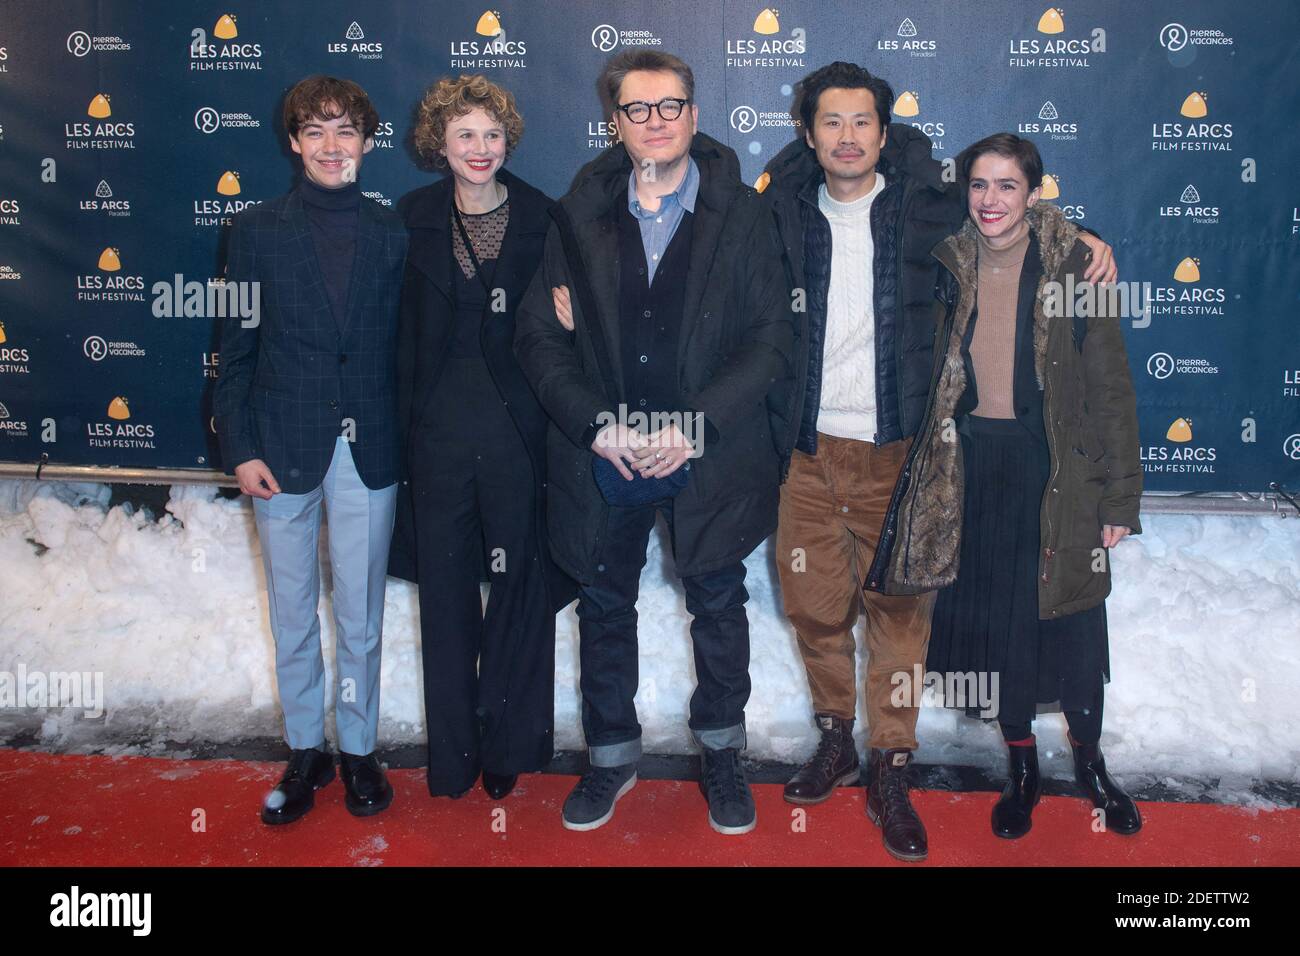 Alex Lawther, Anna Maria Sturm, Regis Roinsard, Frederic Chau and Maria Leite attending the Opening Ceremony of the 11th Les Arcs Film Festival in Les Arcs, France on December 14, 2019. Photo by Aurore Marechal/ABACAPRESS.COM Stock Photo